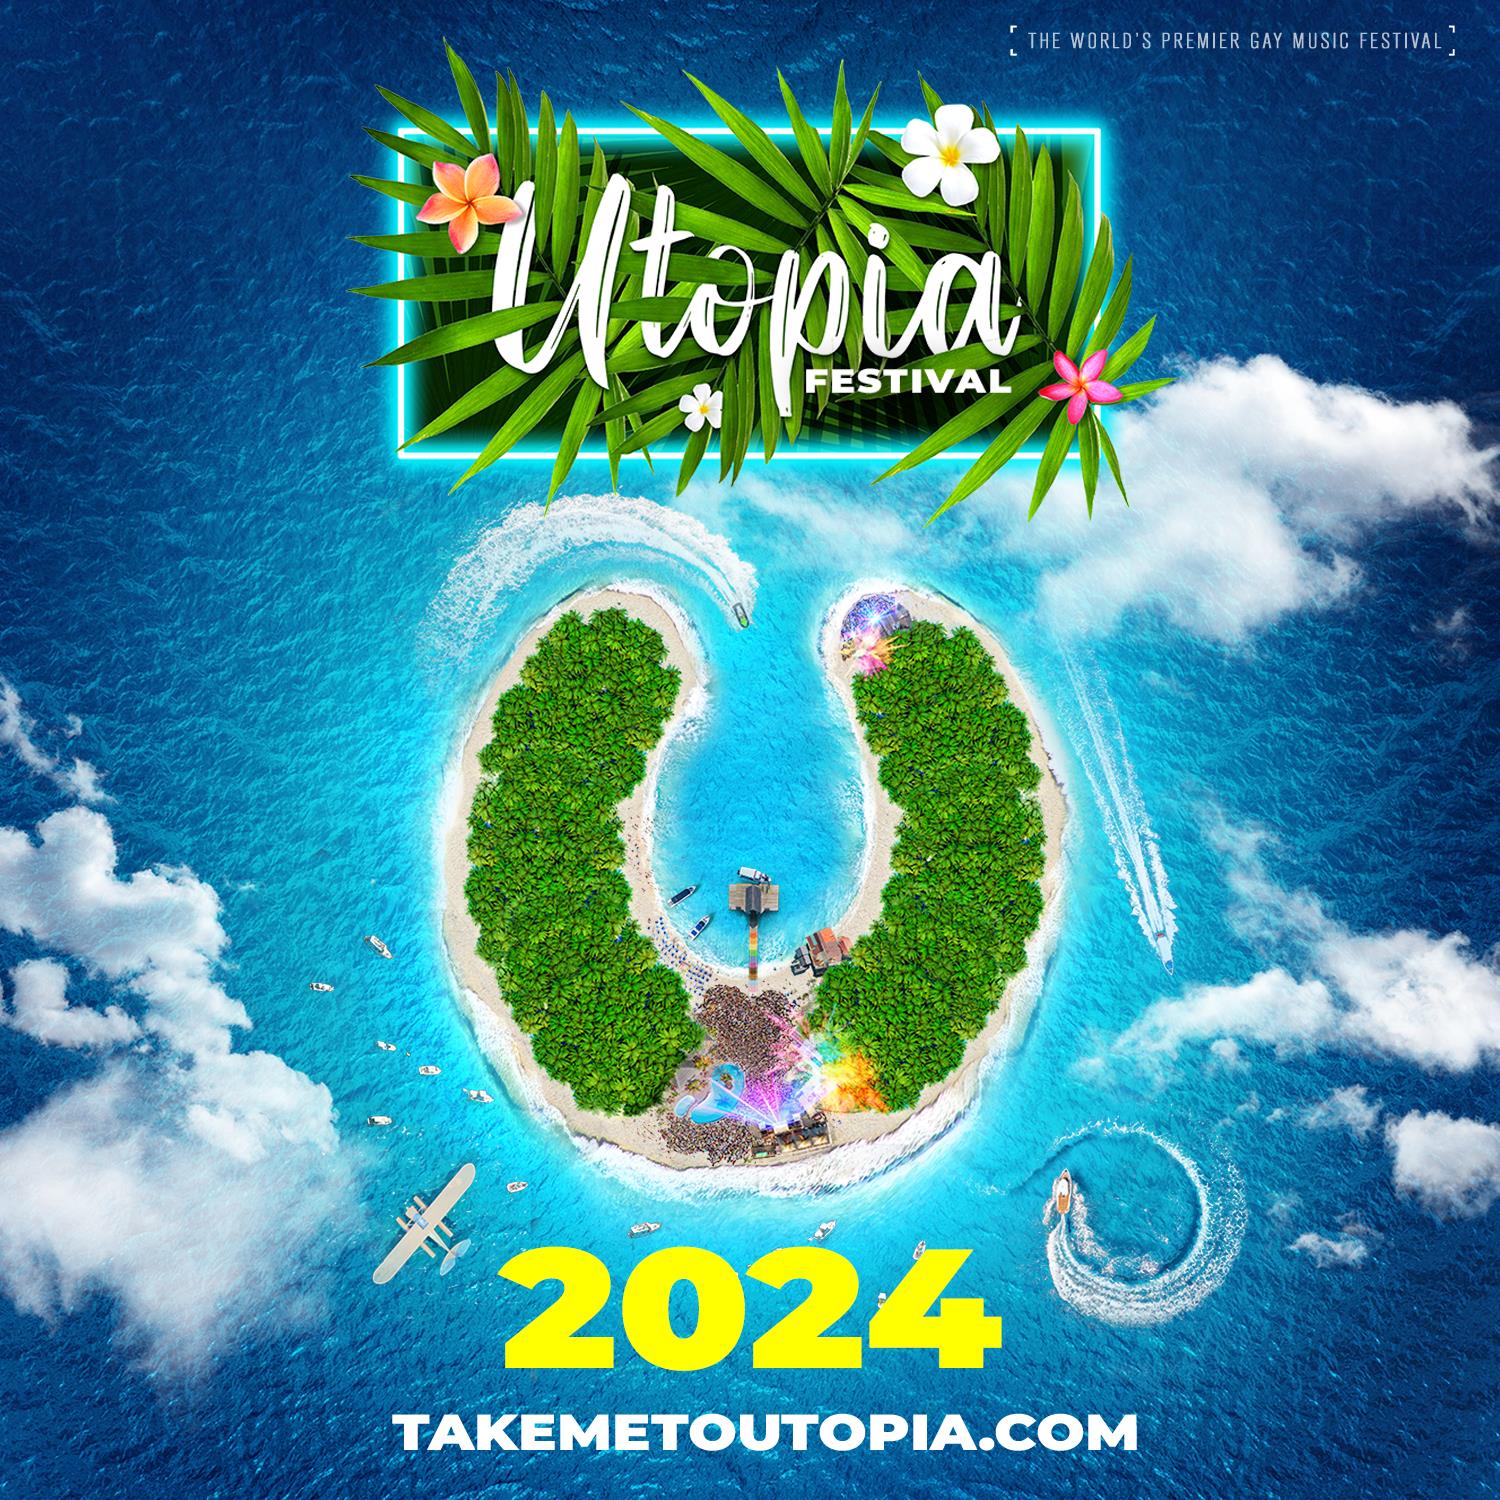 Buy Tickets to UTOPIA FESTIVAL 2024 on Apr 05, 2024